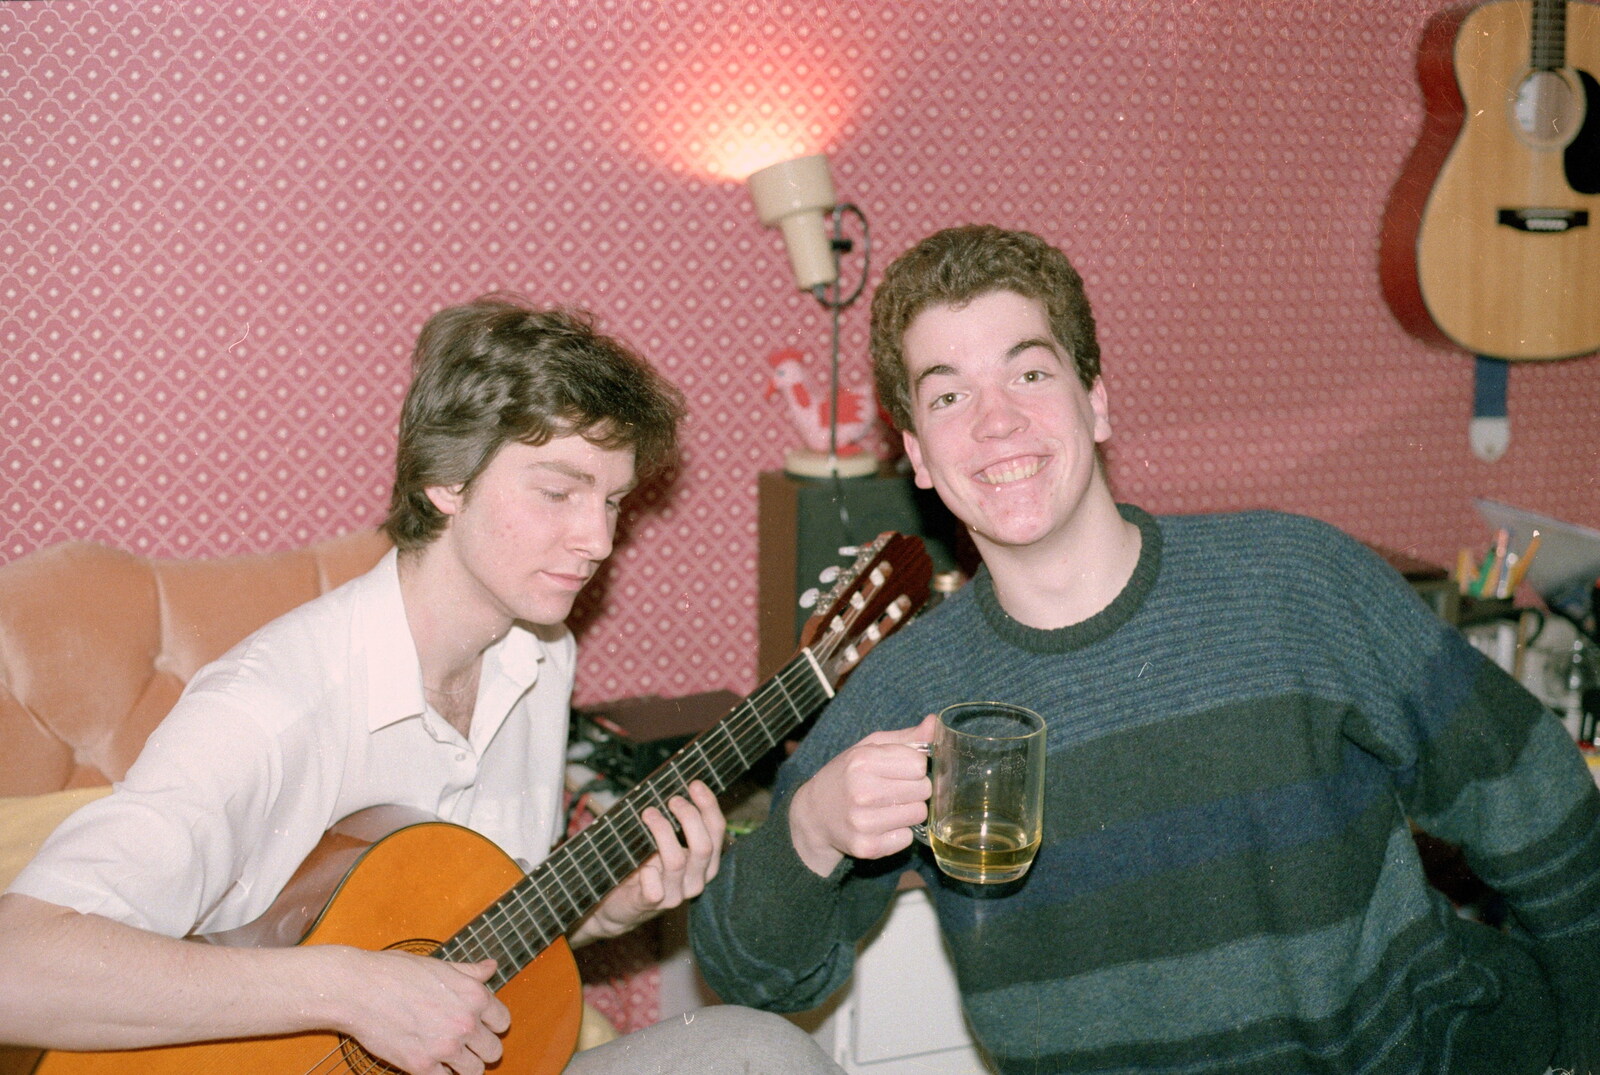 Sean plays guitar as Jon grins from Ford Cottage Pre-Christmas, Barton on Sea, Hampshire - 19th December 1985